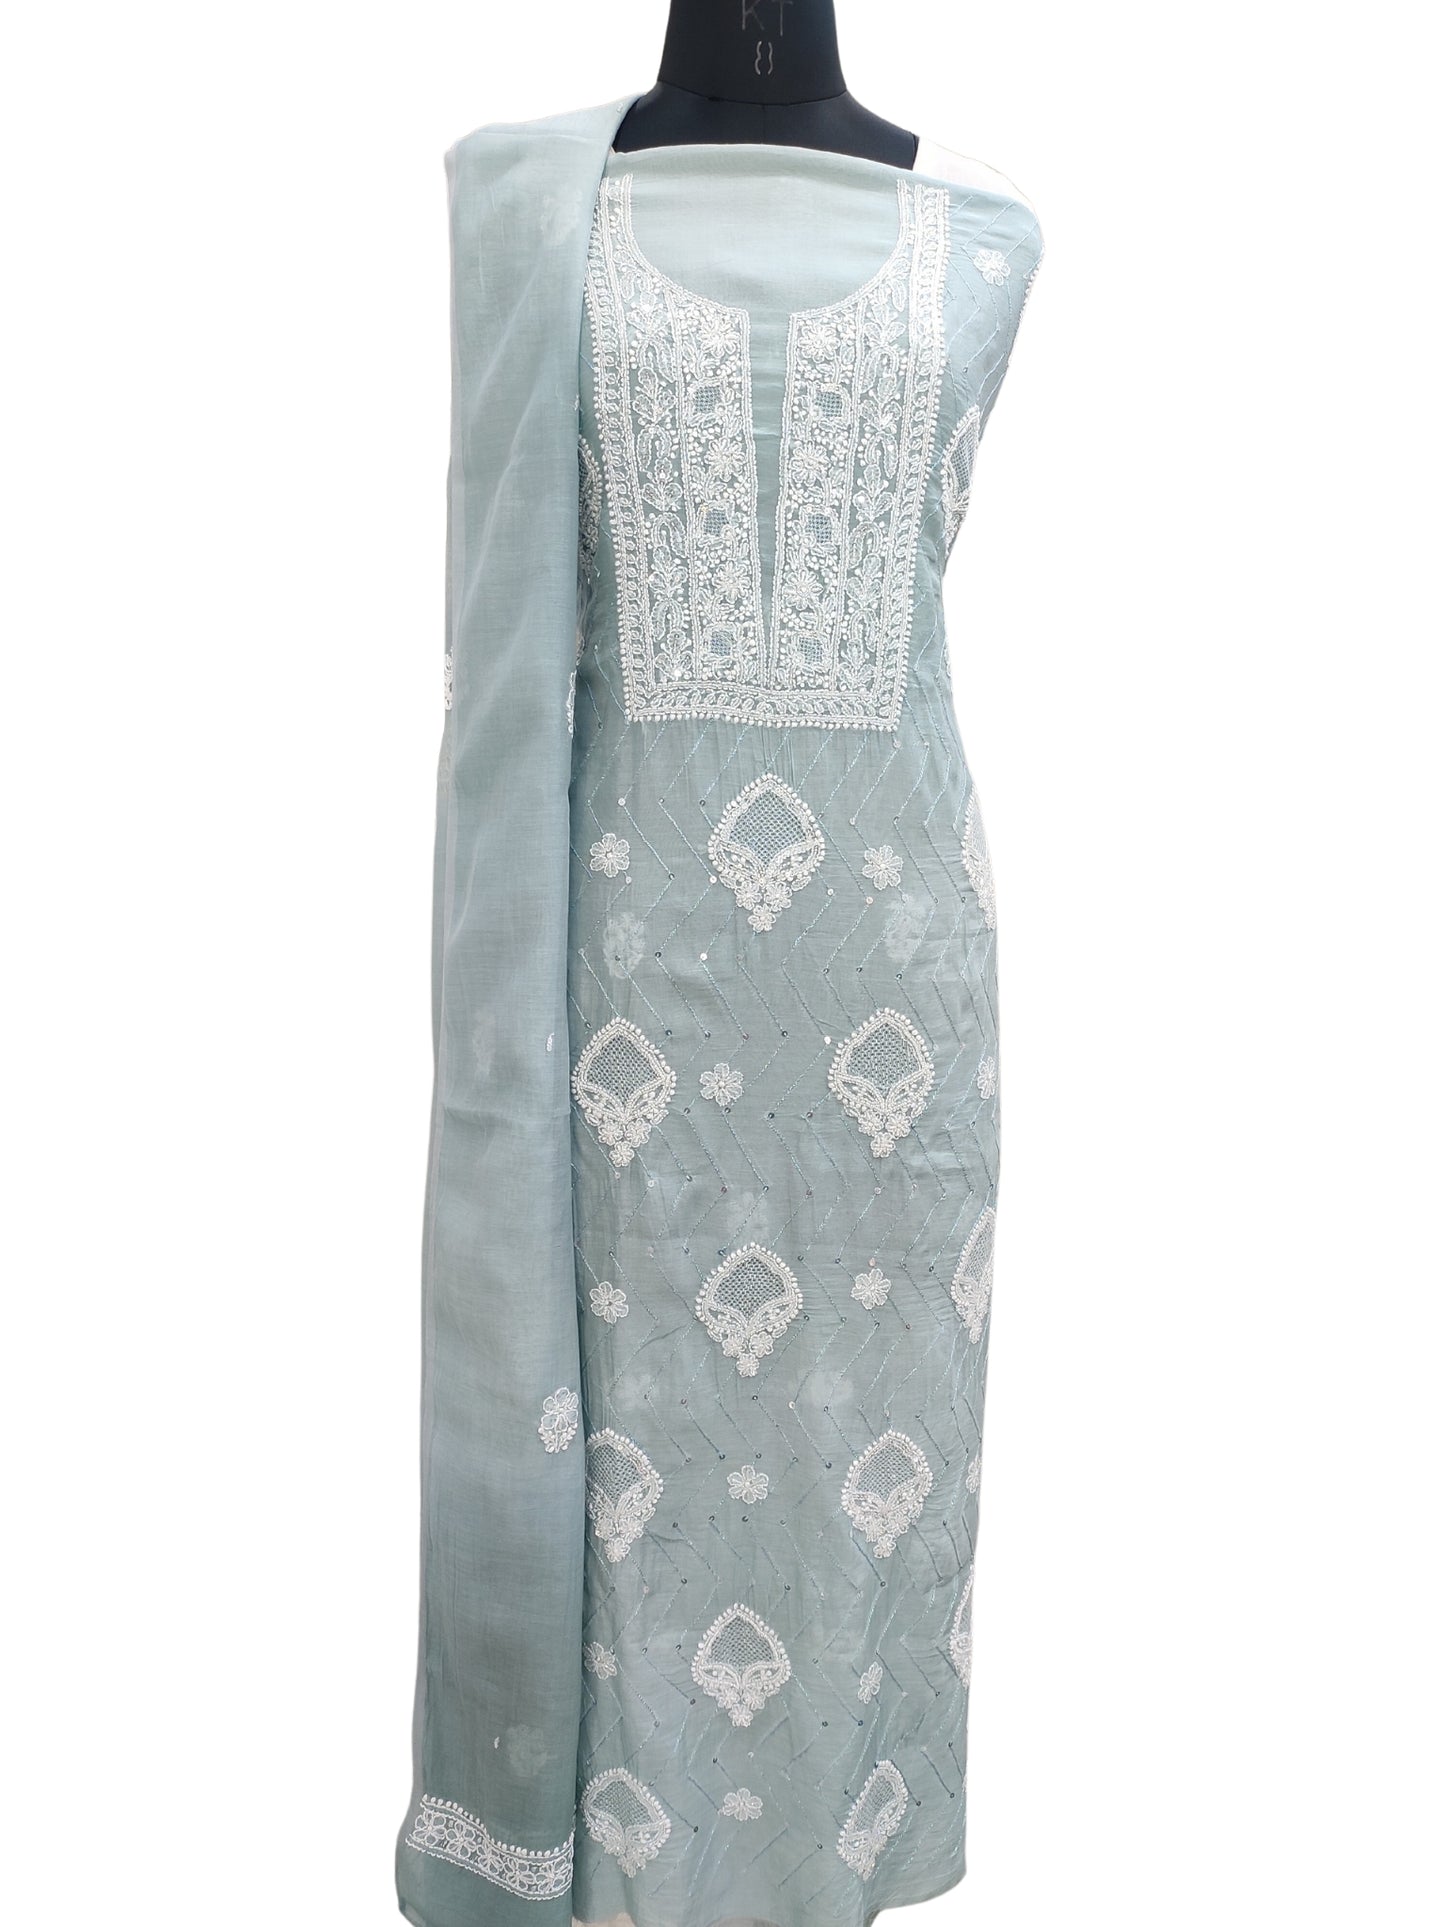 Shyamal Chikan Hand Embroidered Sea green Mul Chanderi Lucknowi Chikankari Unstitched Suit Piece with Pearl & Sequin Work (Set of 2) - S20713